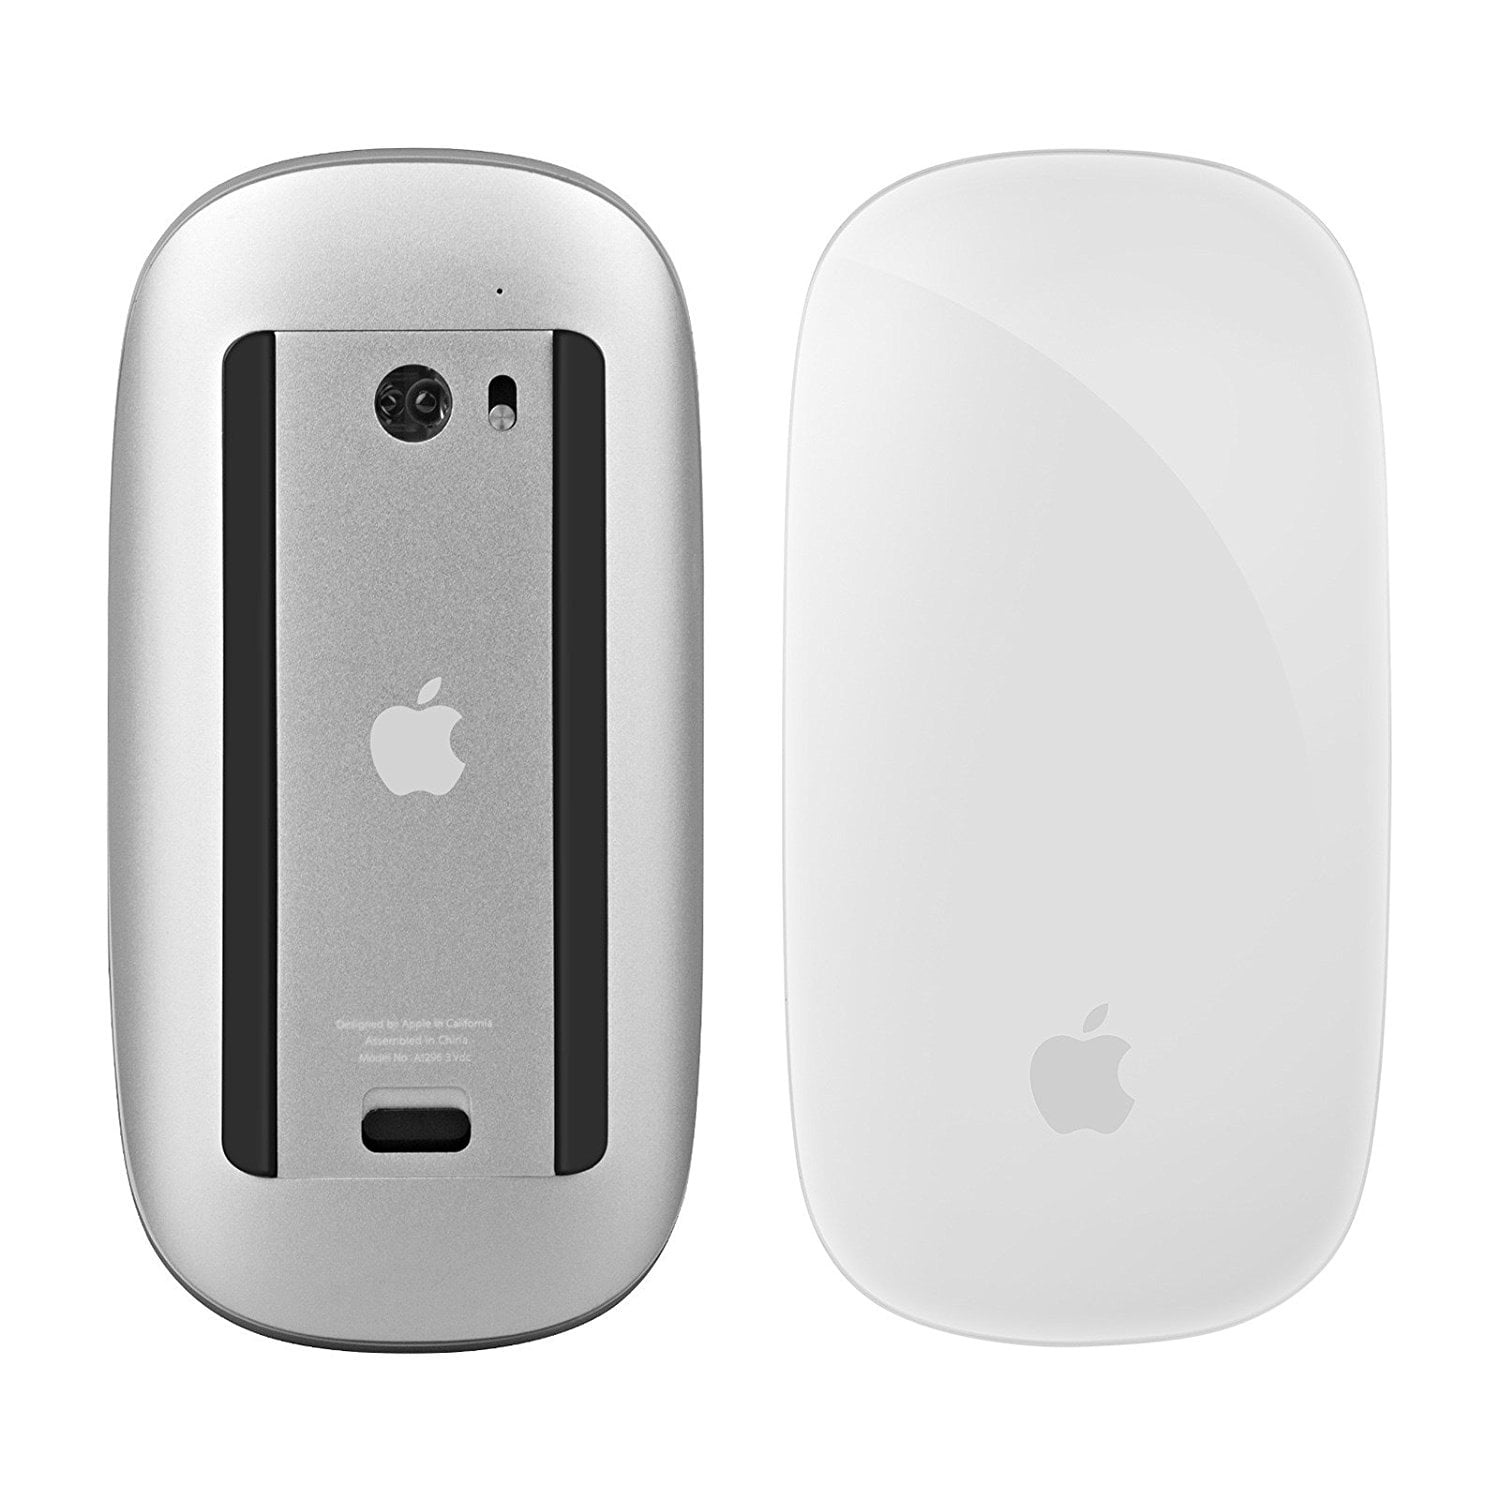 Restored Apple Magic Bluetooth Wireless Laser Mouse - A1296 MB829LL/A White  (Refurbished)